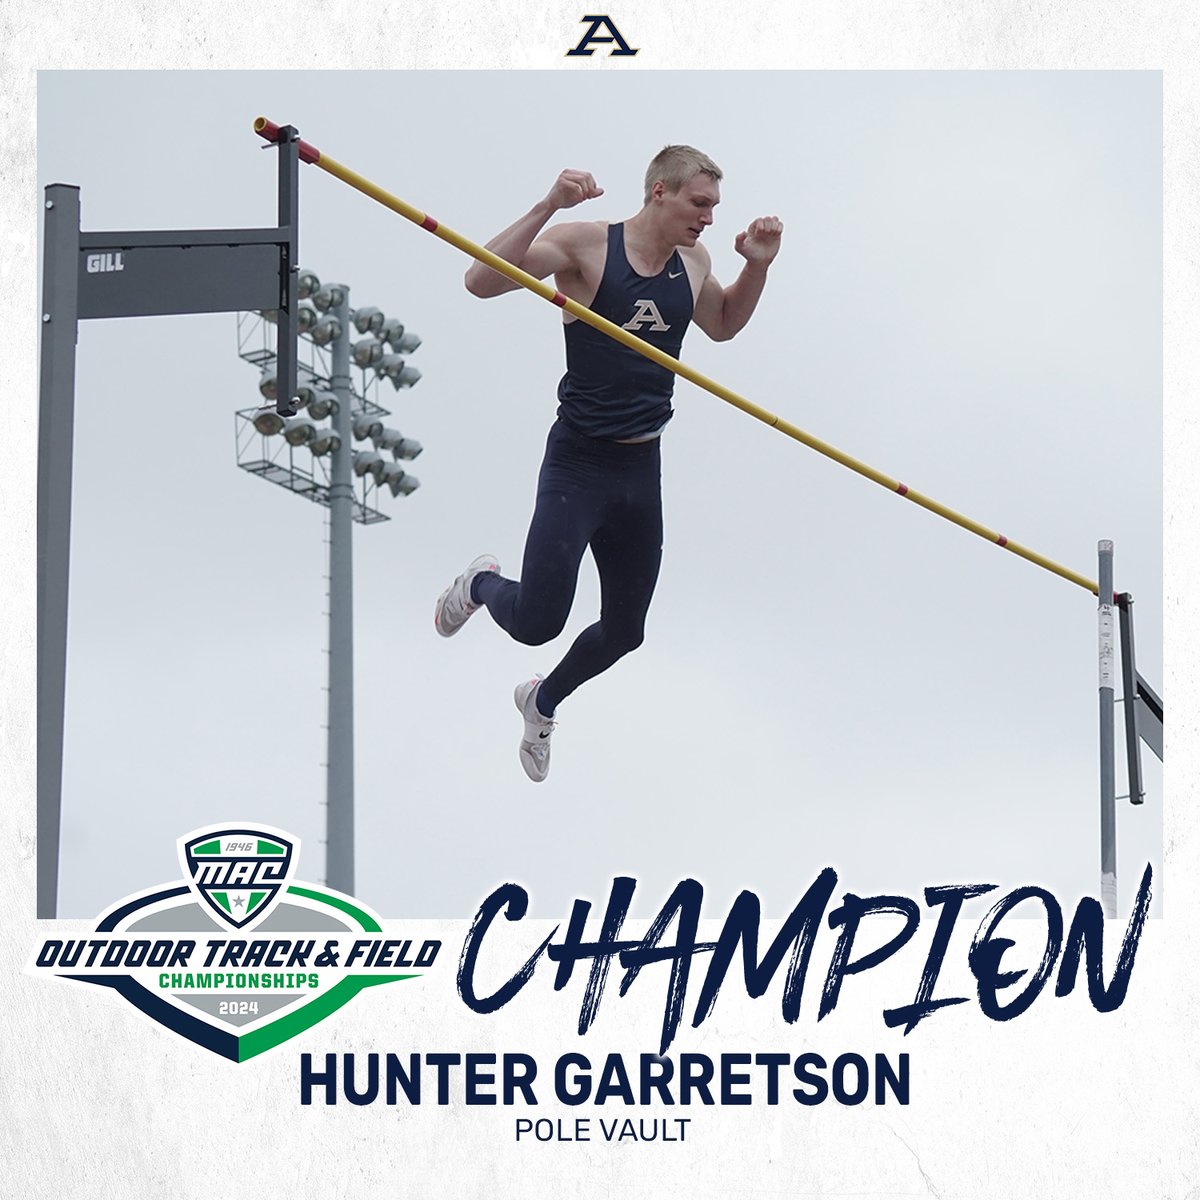 🚨 MAC CHAMPION 🚨 👏 Congrats to @ZipsTFCC Hunter Garretson on winning his seventh @MACSports pole vault title with a winning clearance of 17-5 (5.31m) #GoZips | @ZipsTFCC 🦘